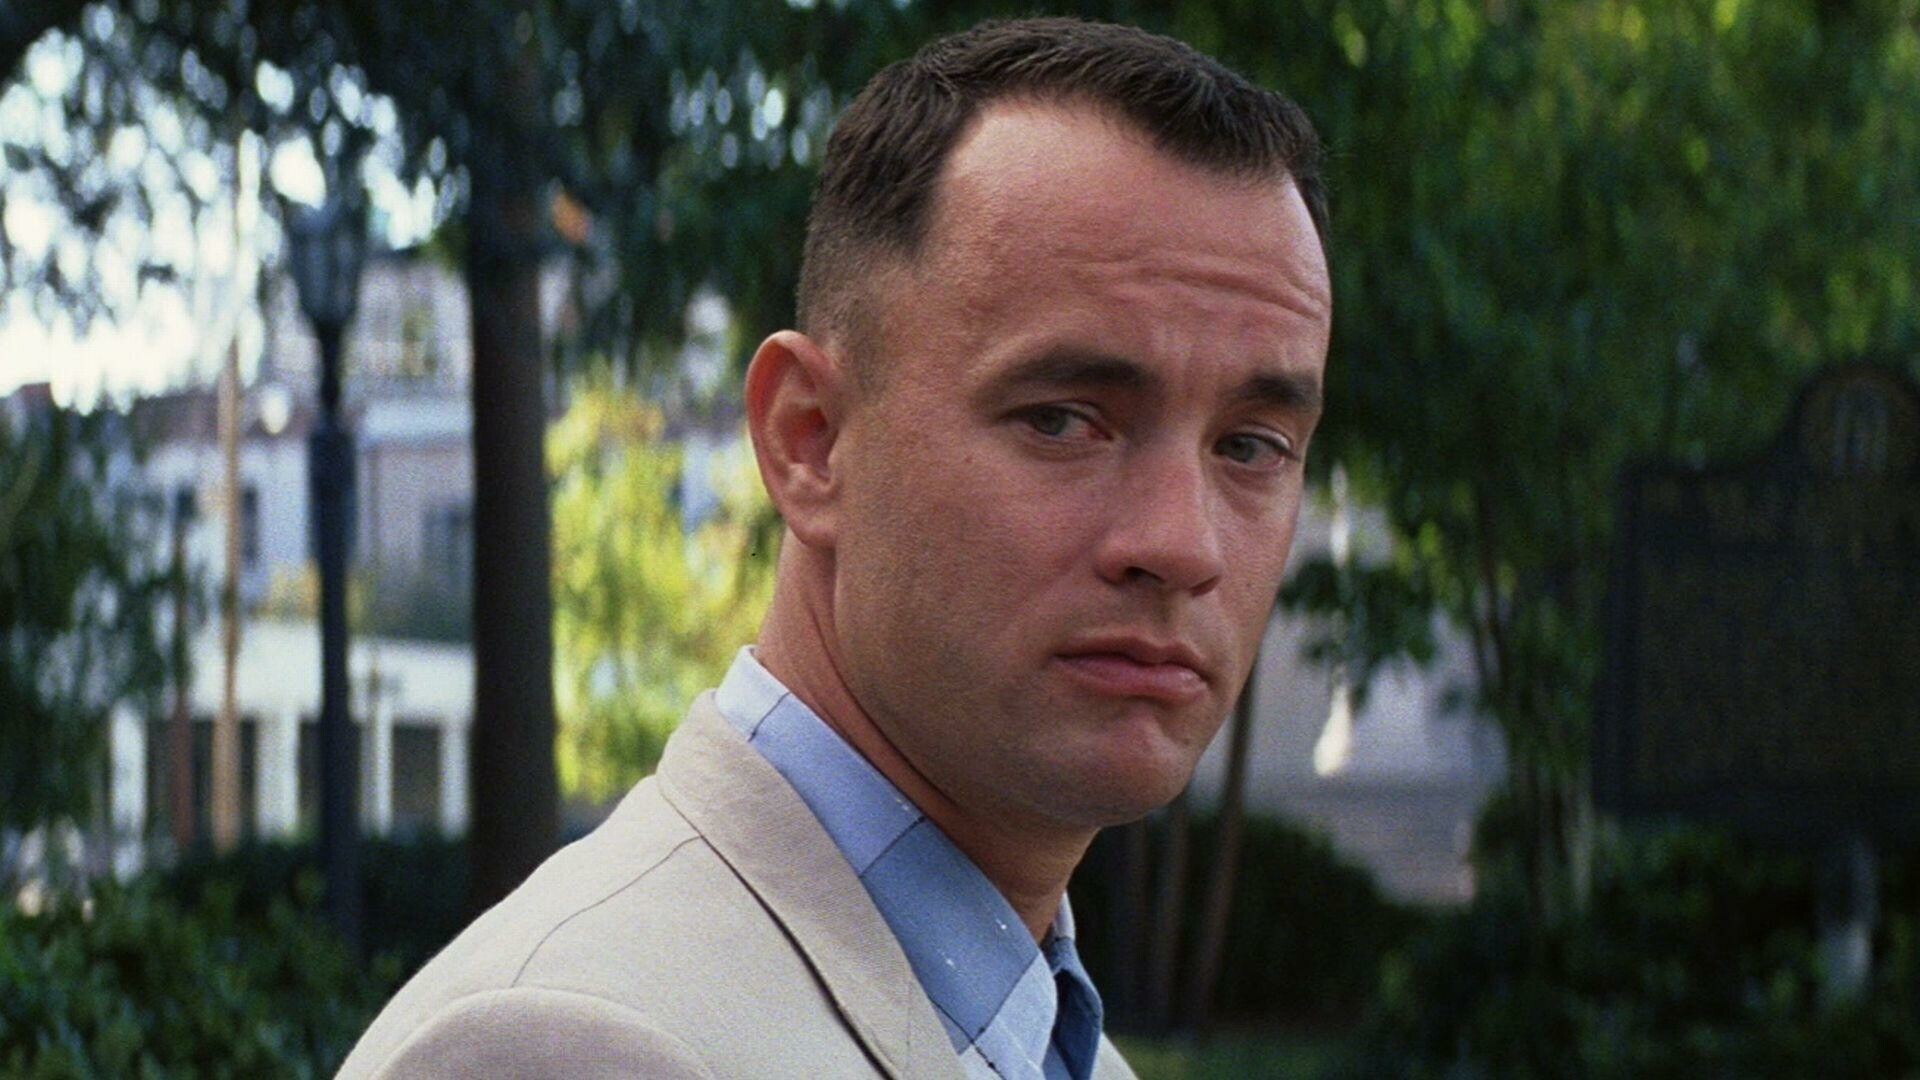 Forrest Gump: A 1994 American comedy-drama film directed by Robert Zemeckis. 1920x1080 Full HD Wallpaper.